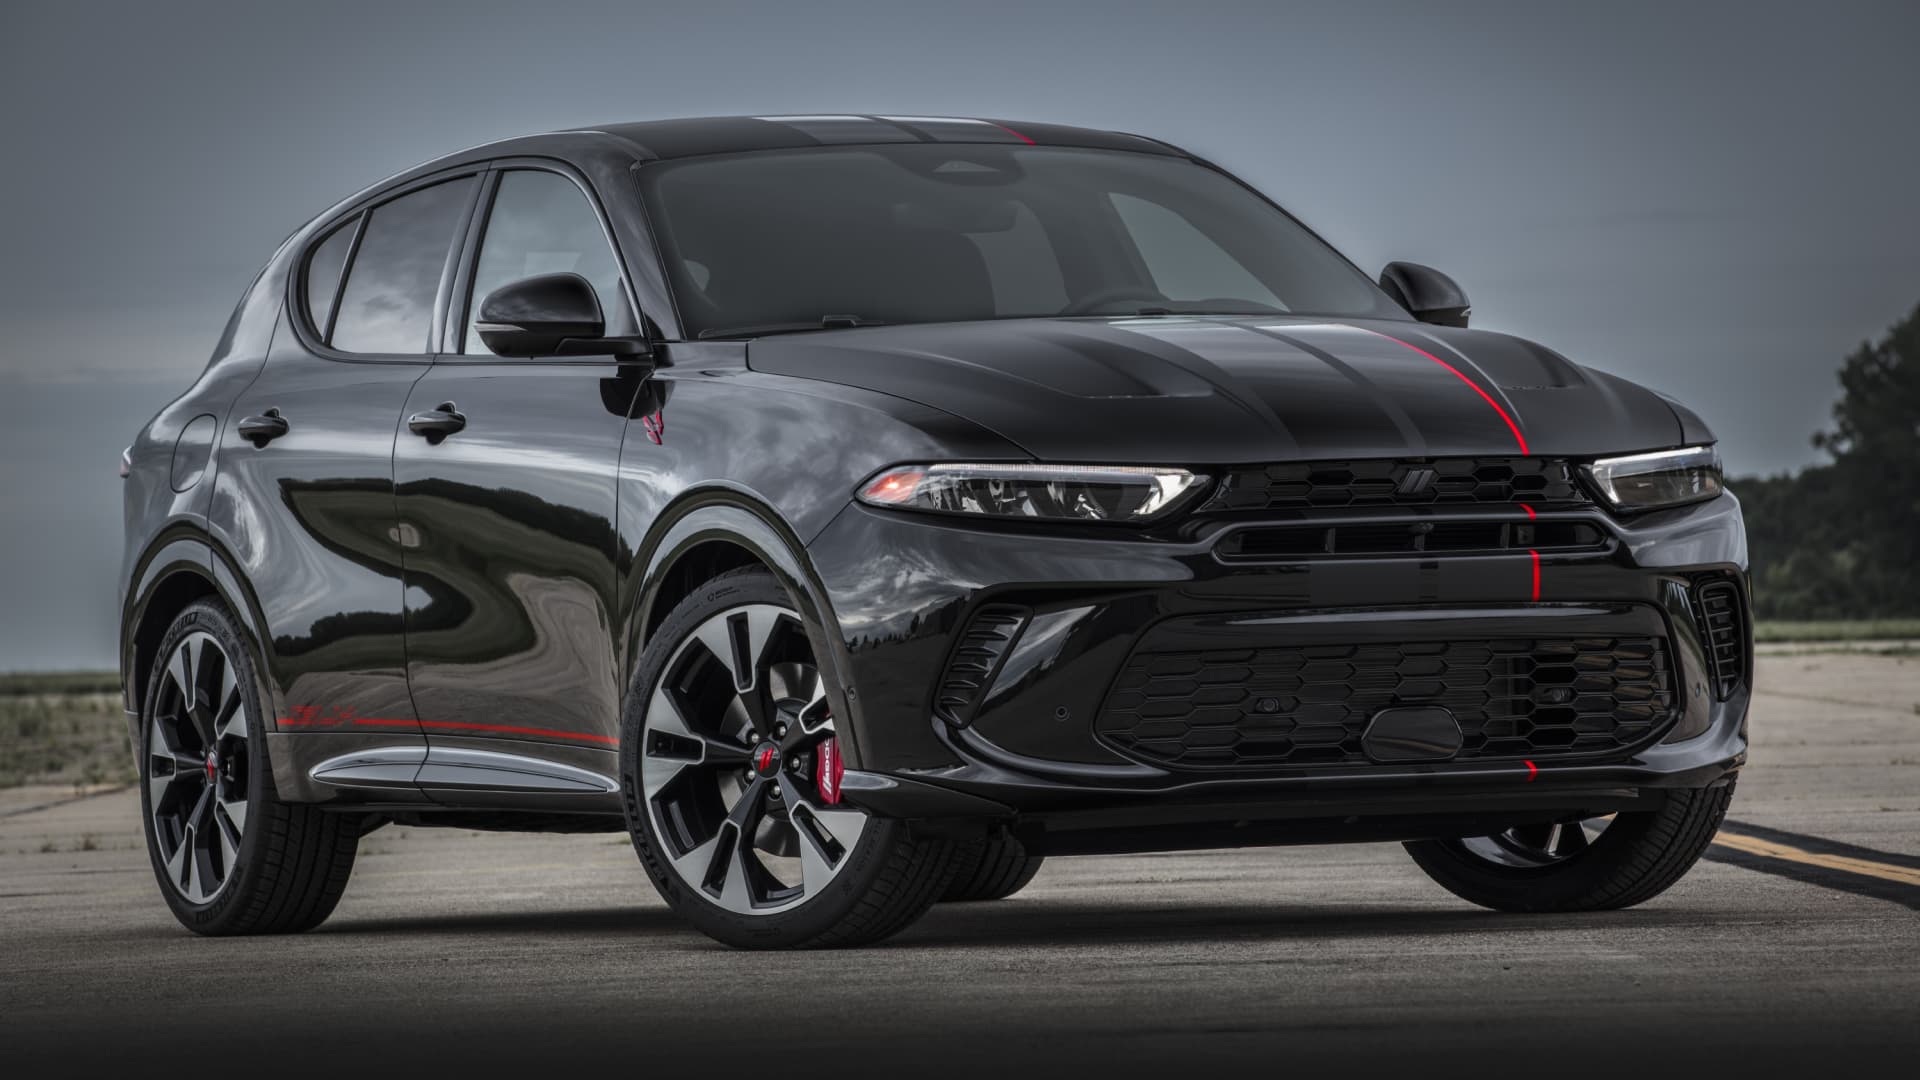 This is Dodge’s first electrified vehicle